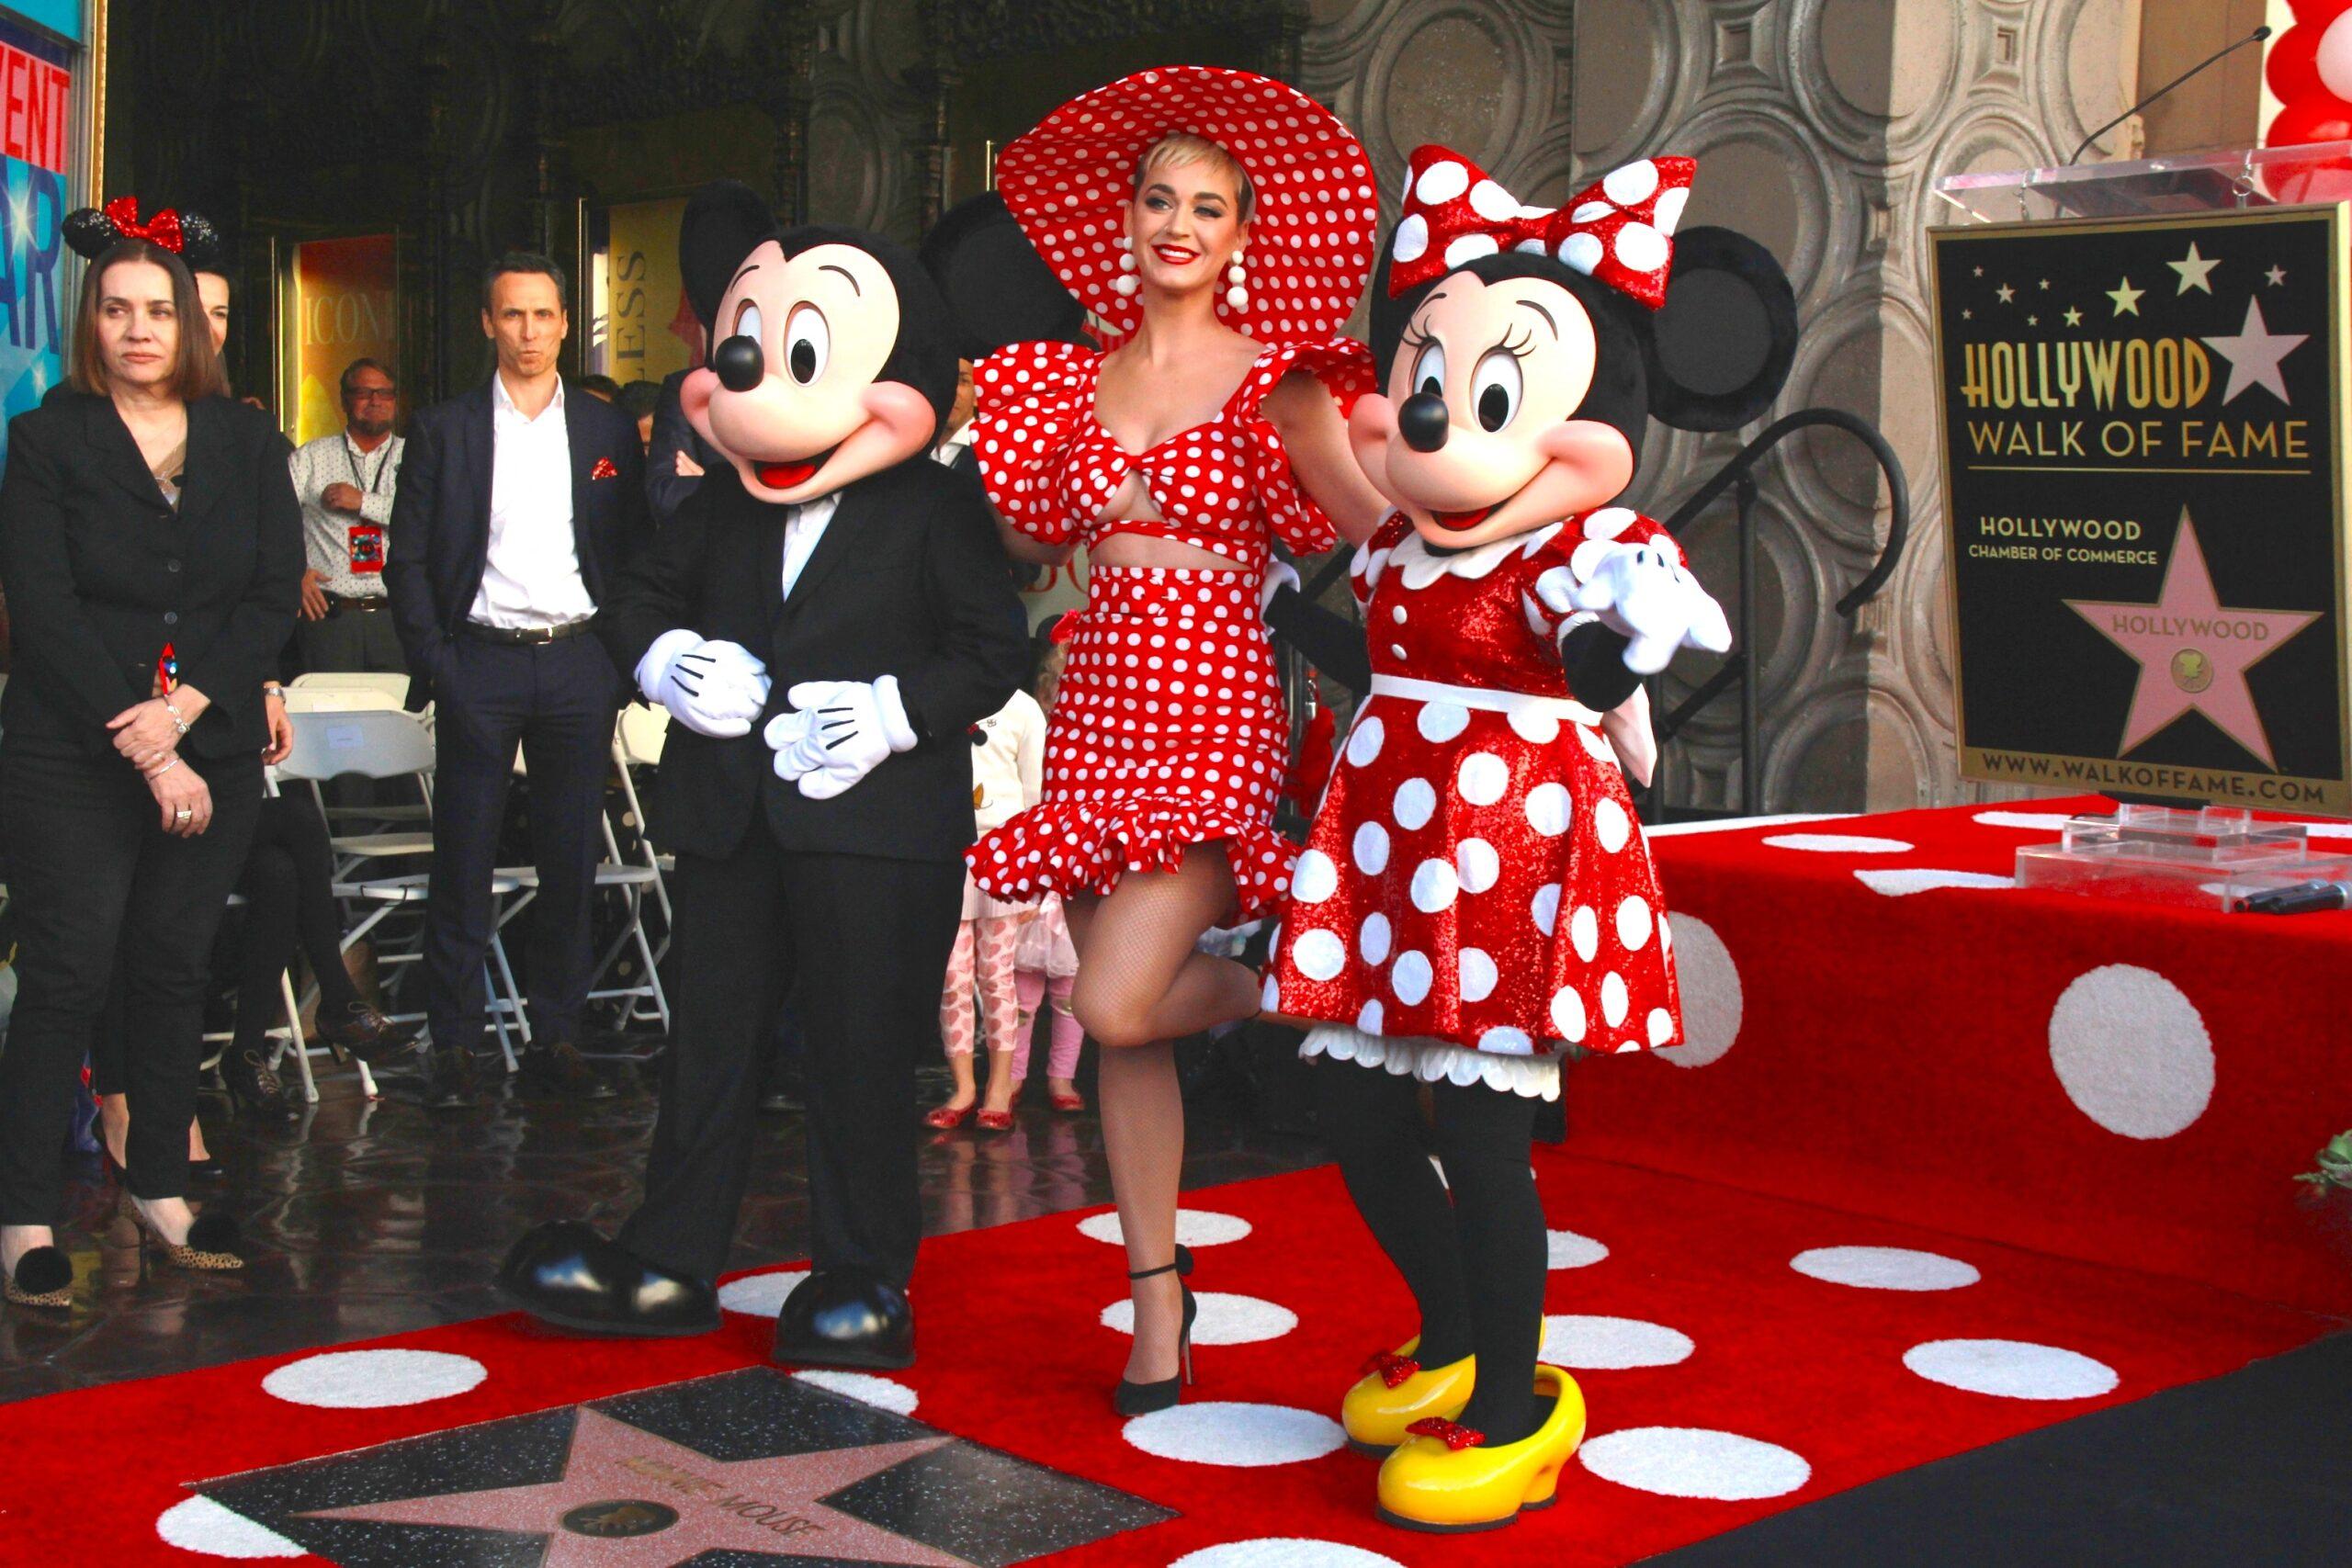 Katy Perry posing with Mickey and Minnie Mouse